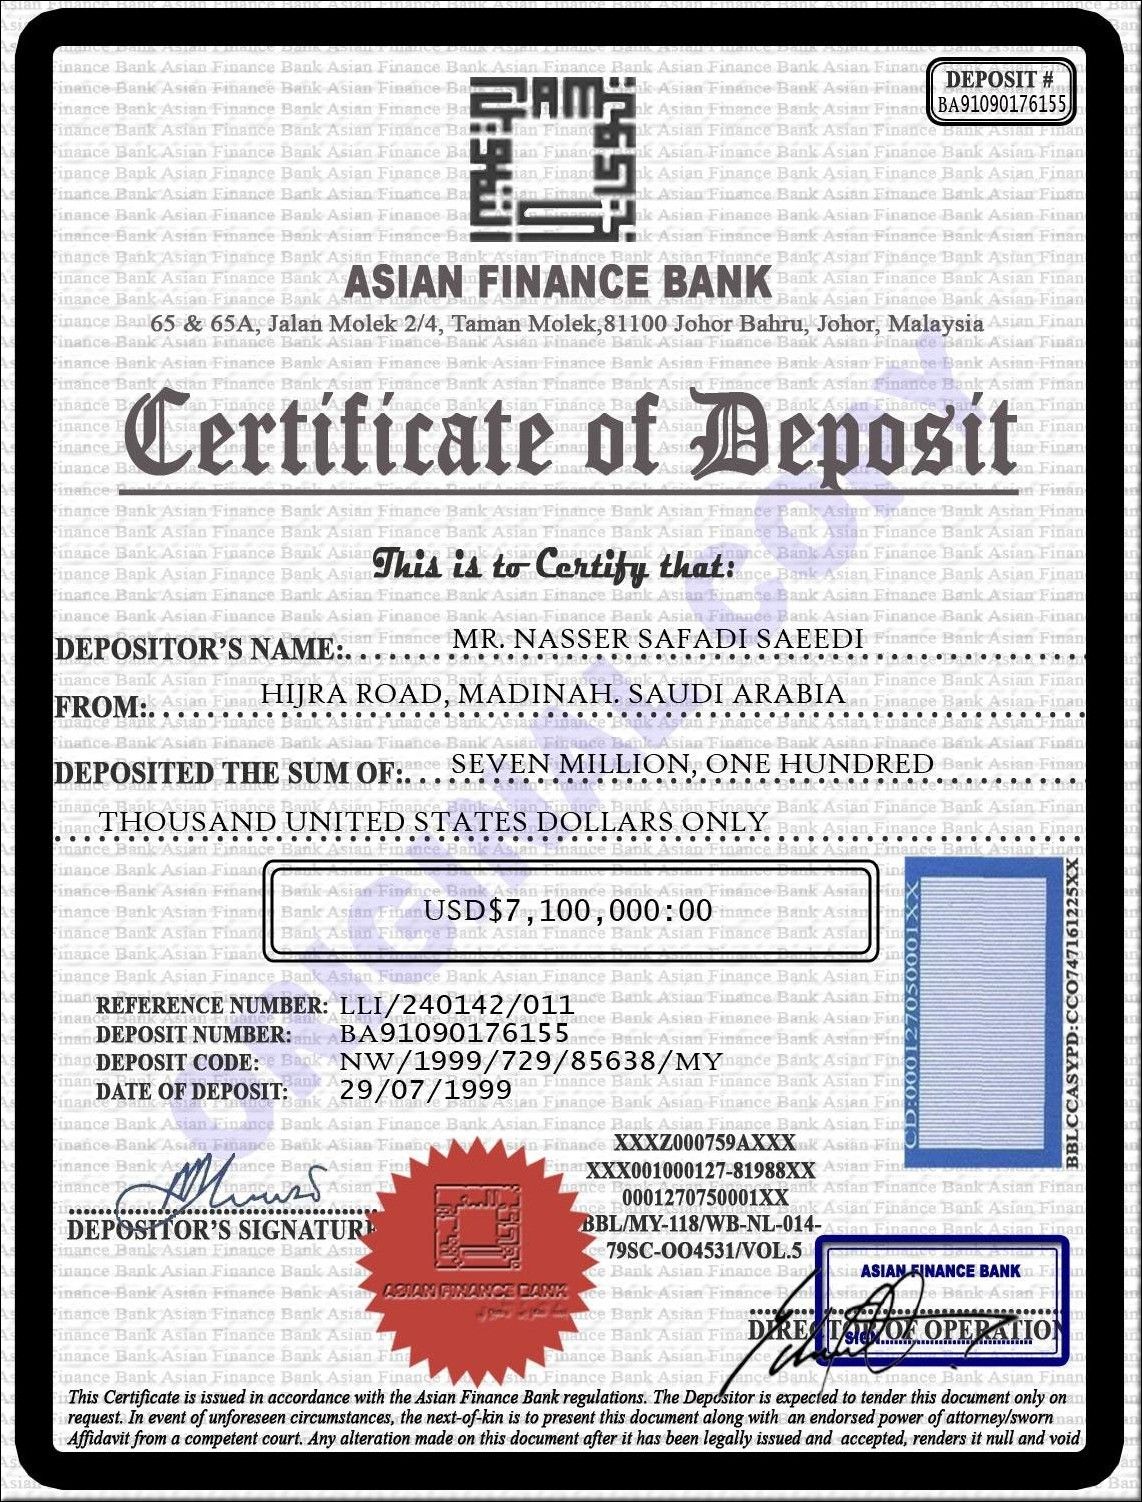 2. Features of a Certificate of Deposit Account